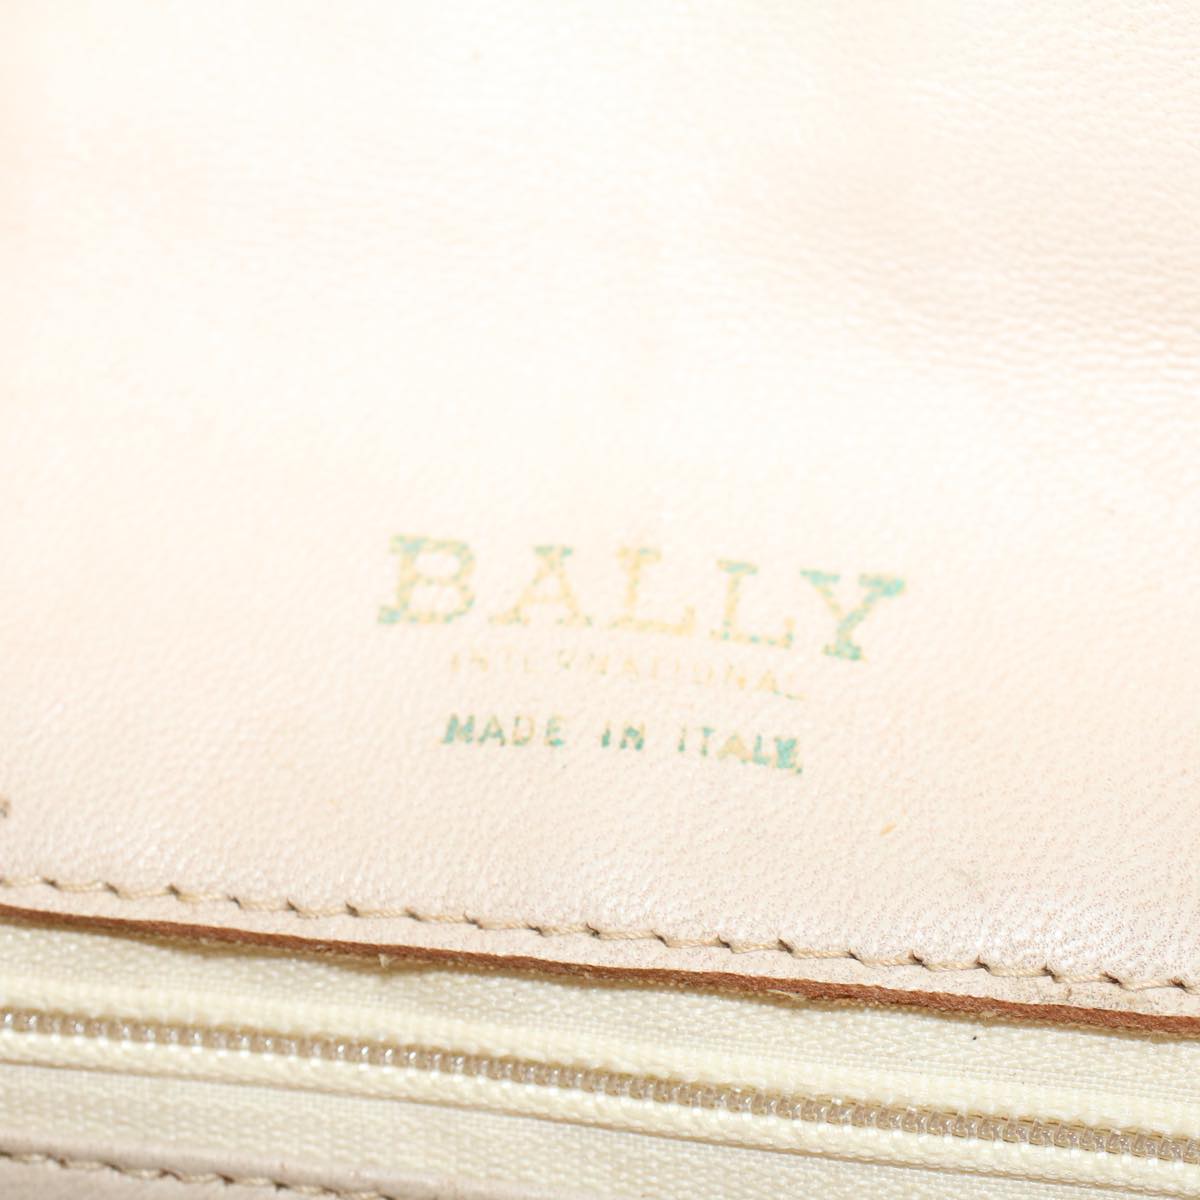 BALLY Chain Shoulder Bag Leather 2Set White Green Auth bs6639